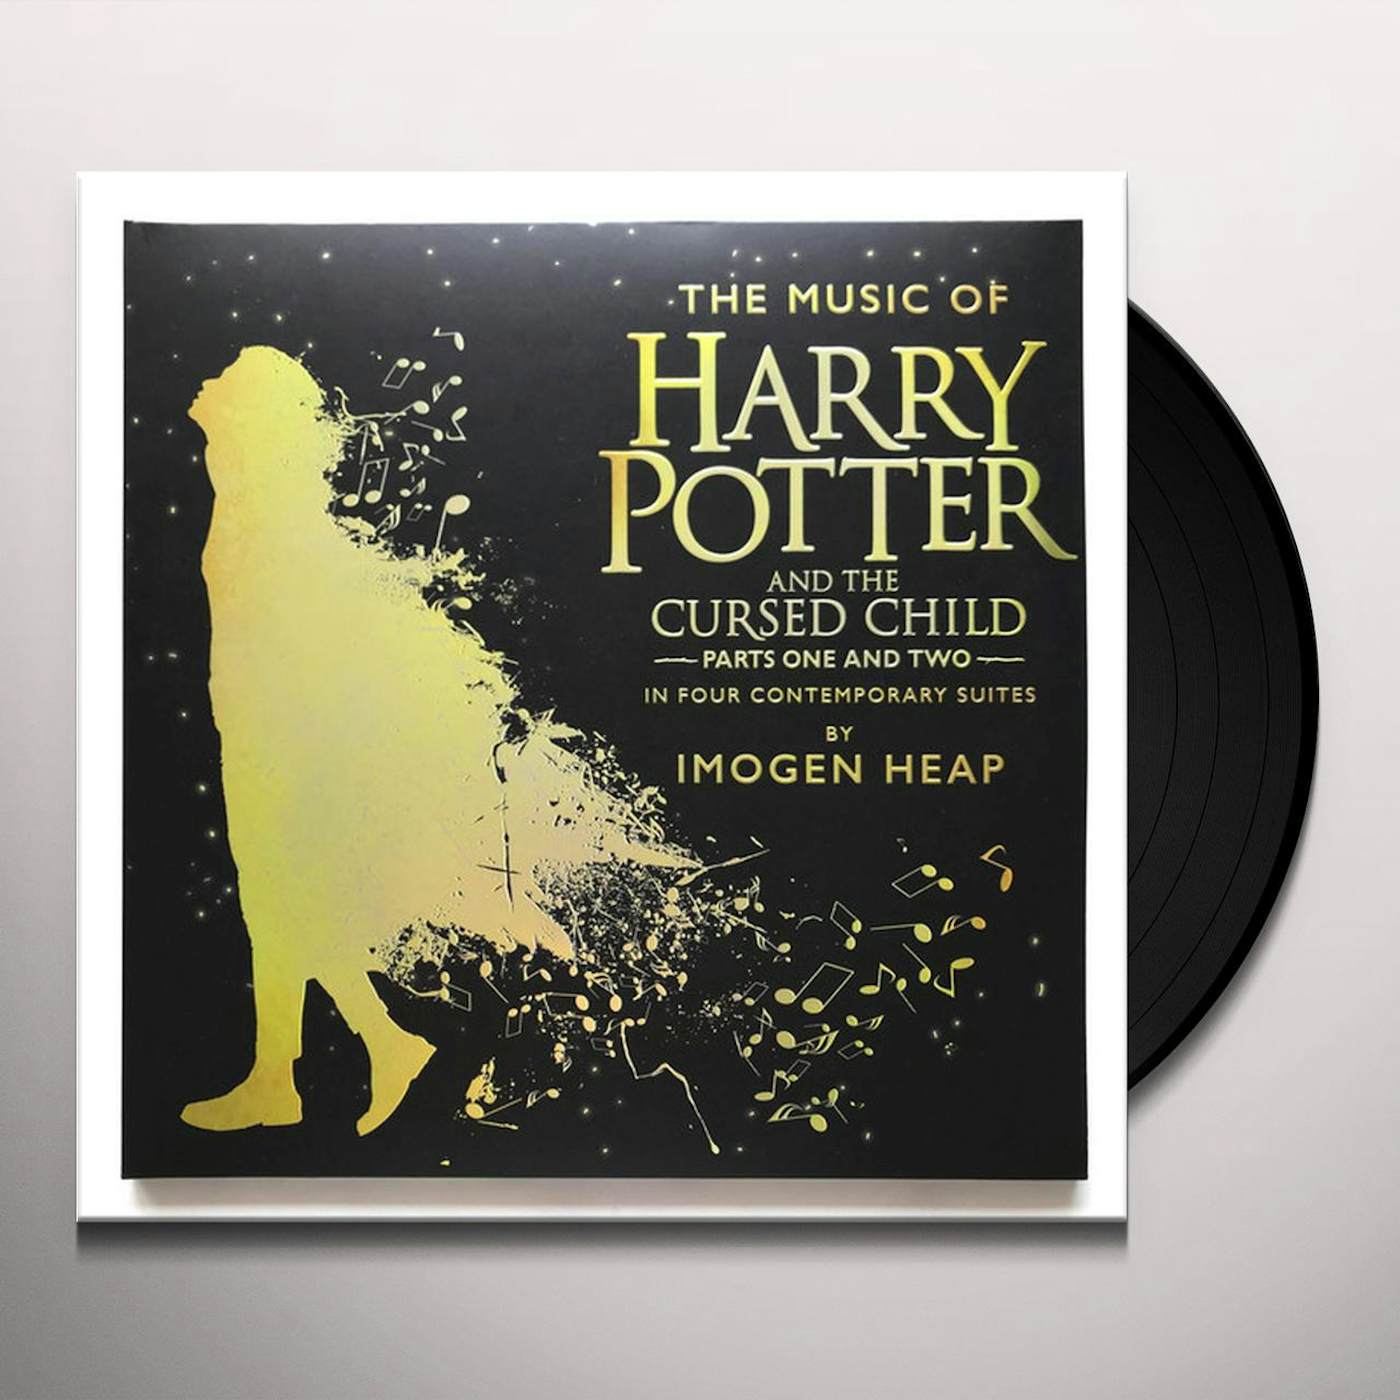 Imogen Heap MUSIC OF HARRY POTTER & THE CURSED CHILD IN FOUR CONTEMPORARY SUITES (2LP/180G) Vinyl Record